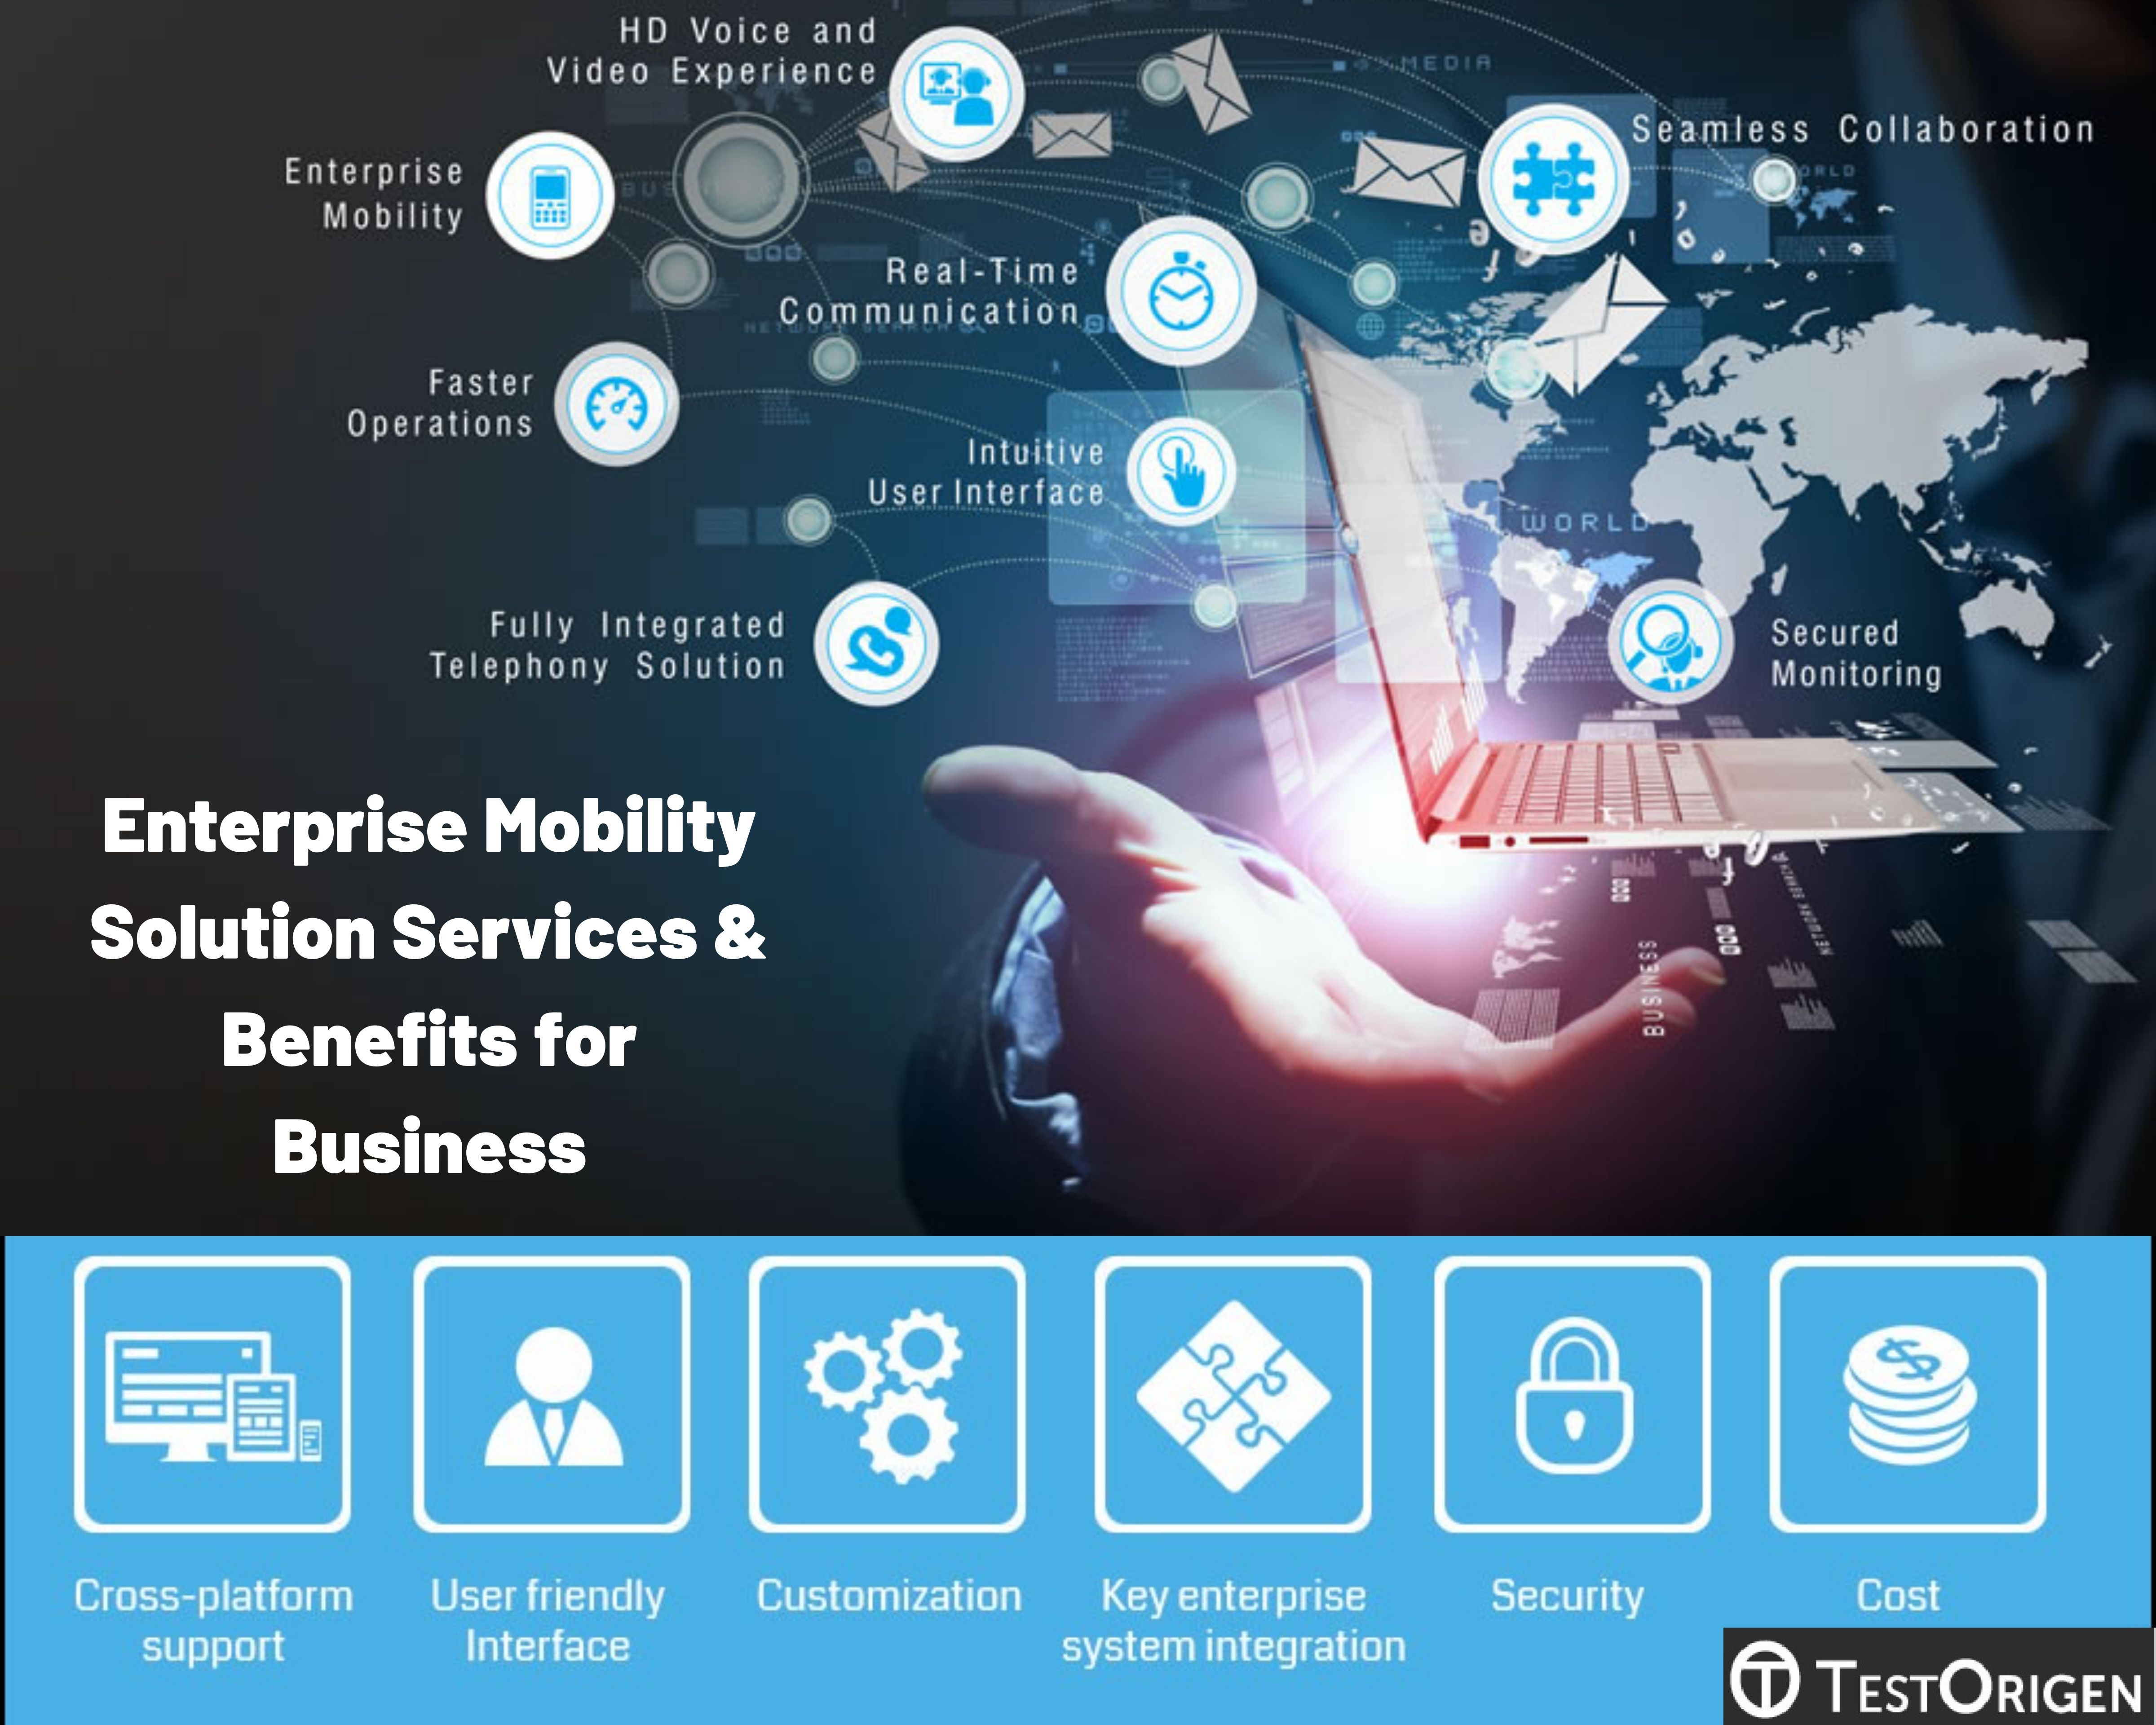 Enterprise Mobility Solution Services & Benefits for Business